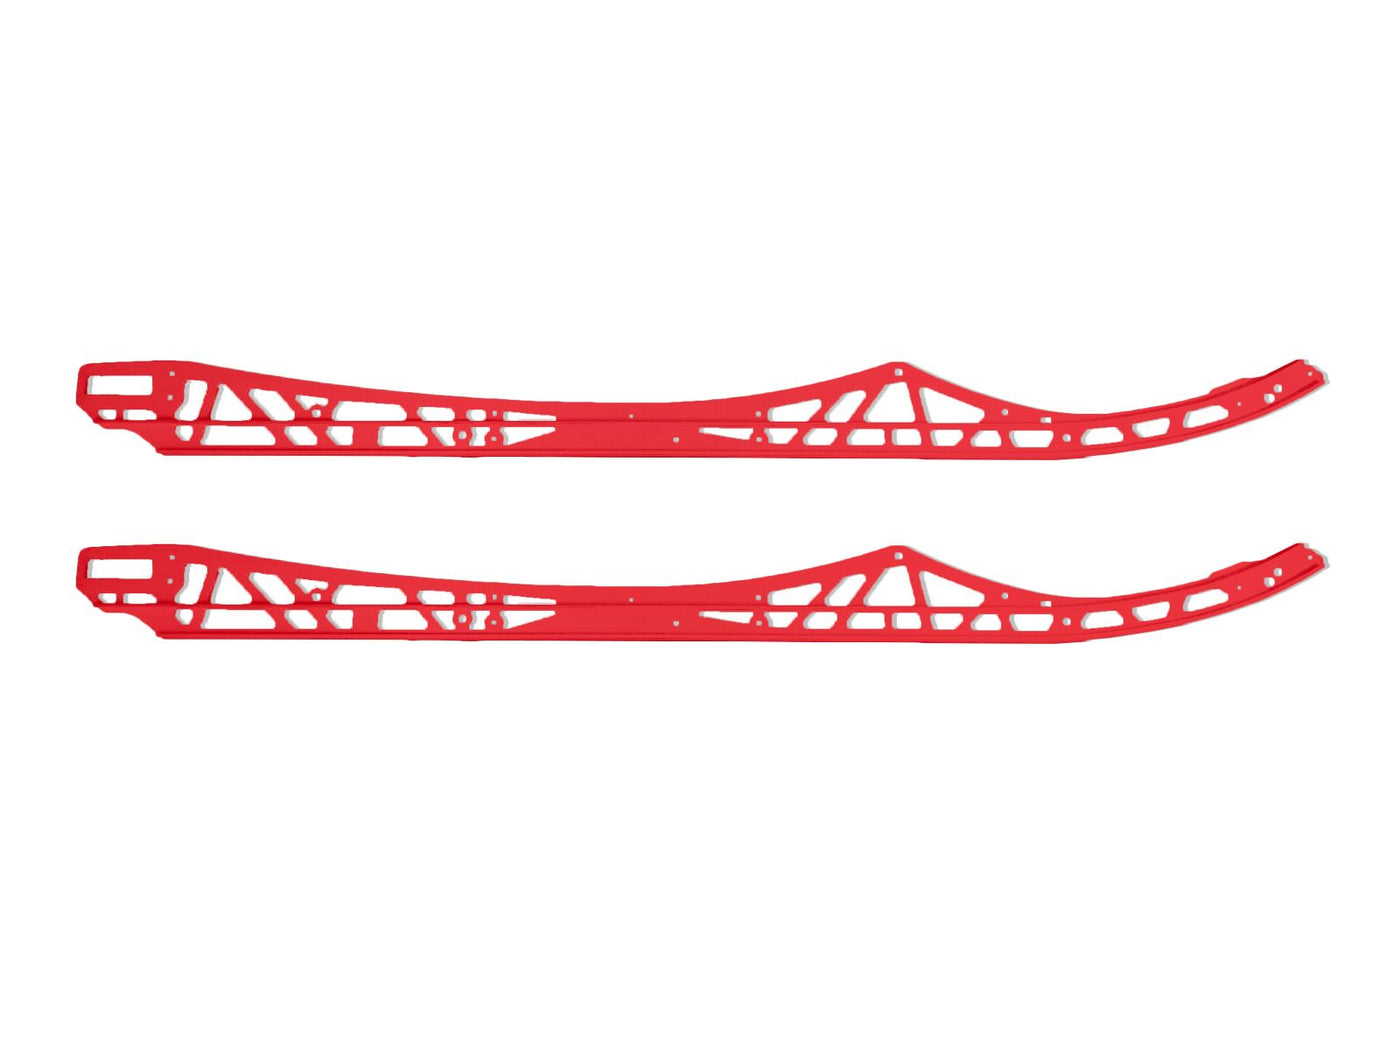 Polaris Axys PRO RMK Rails- 155-Classic-Red - IceAgePerformance